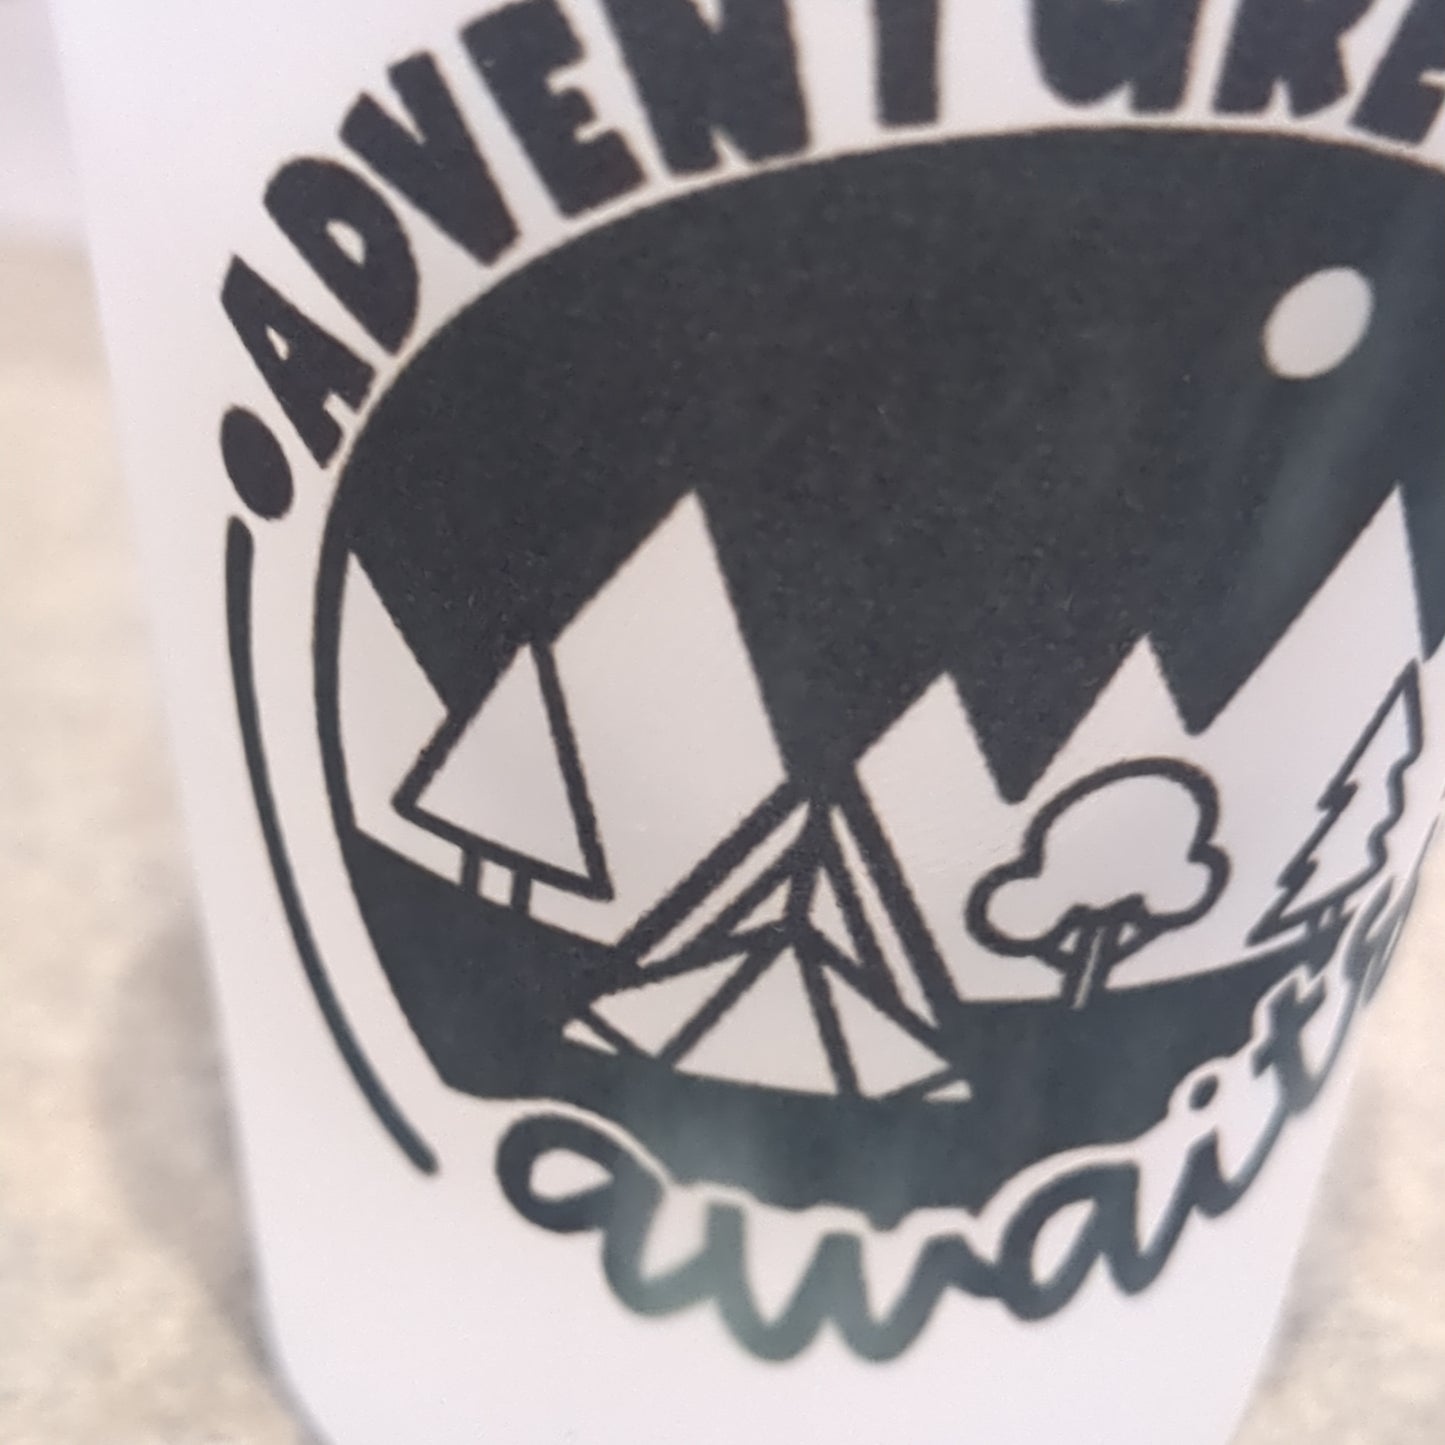 Imperfect Frosted glass shot glass.  Adventure awaits